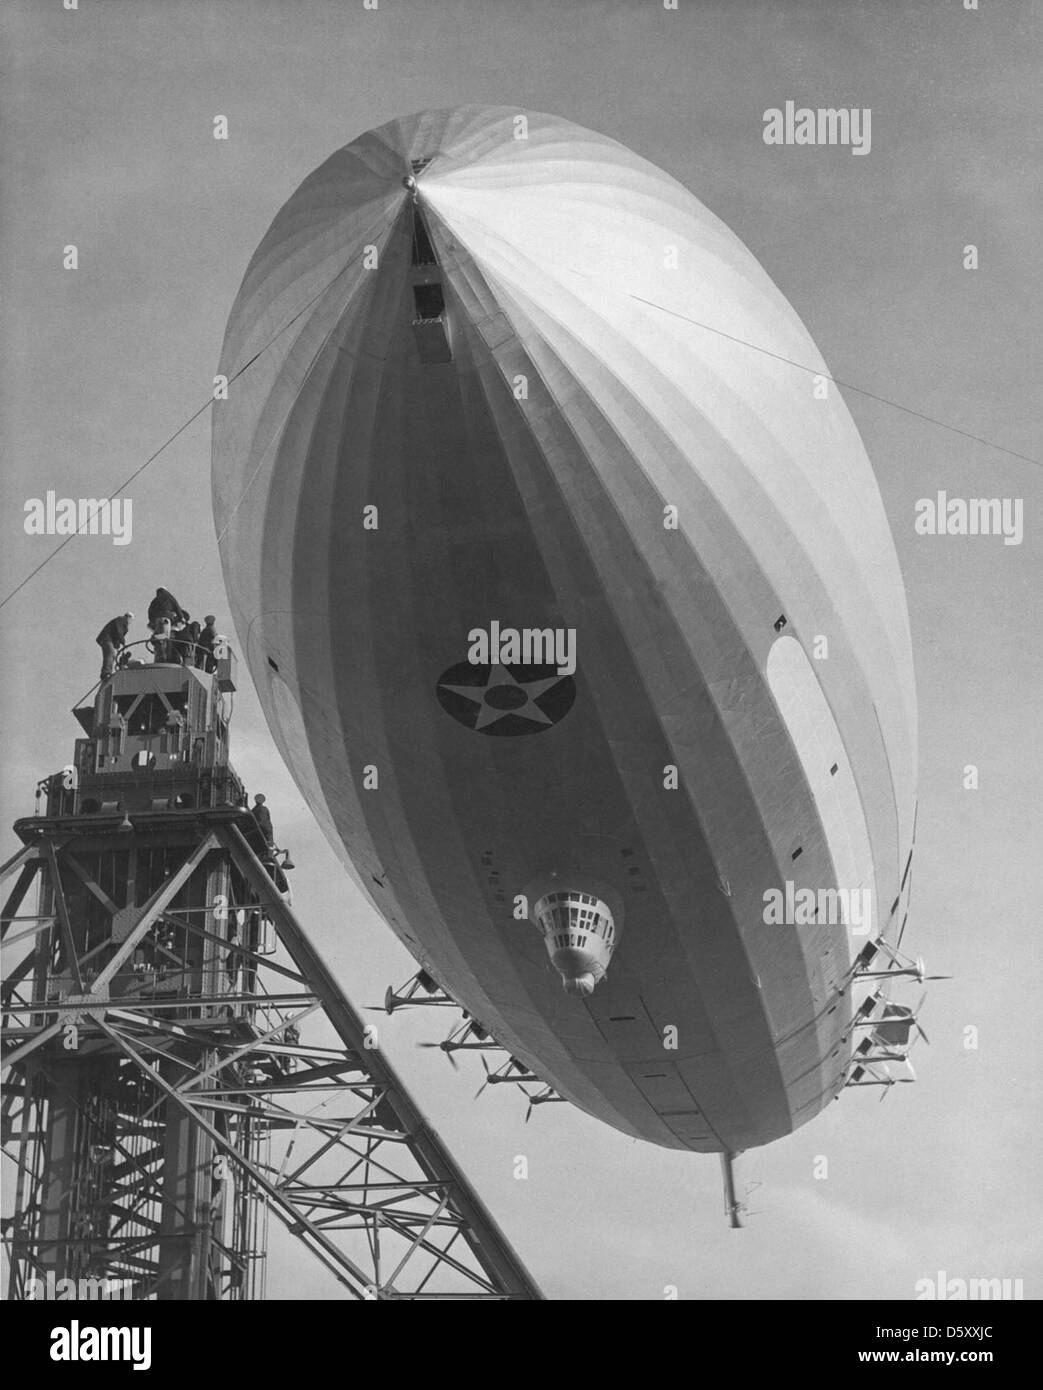 July 24, 1957 - Navy ZSC-1 pre-war Airship ties up at mooring platform in Yucca Flat, having just arrived from Lakehurst NAS to prepare for Atomic blast tests. Stock Photo